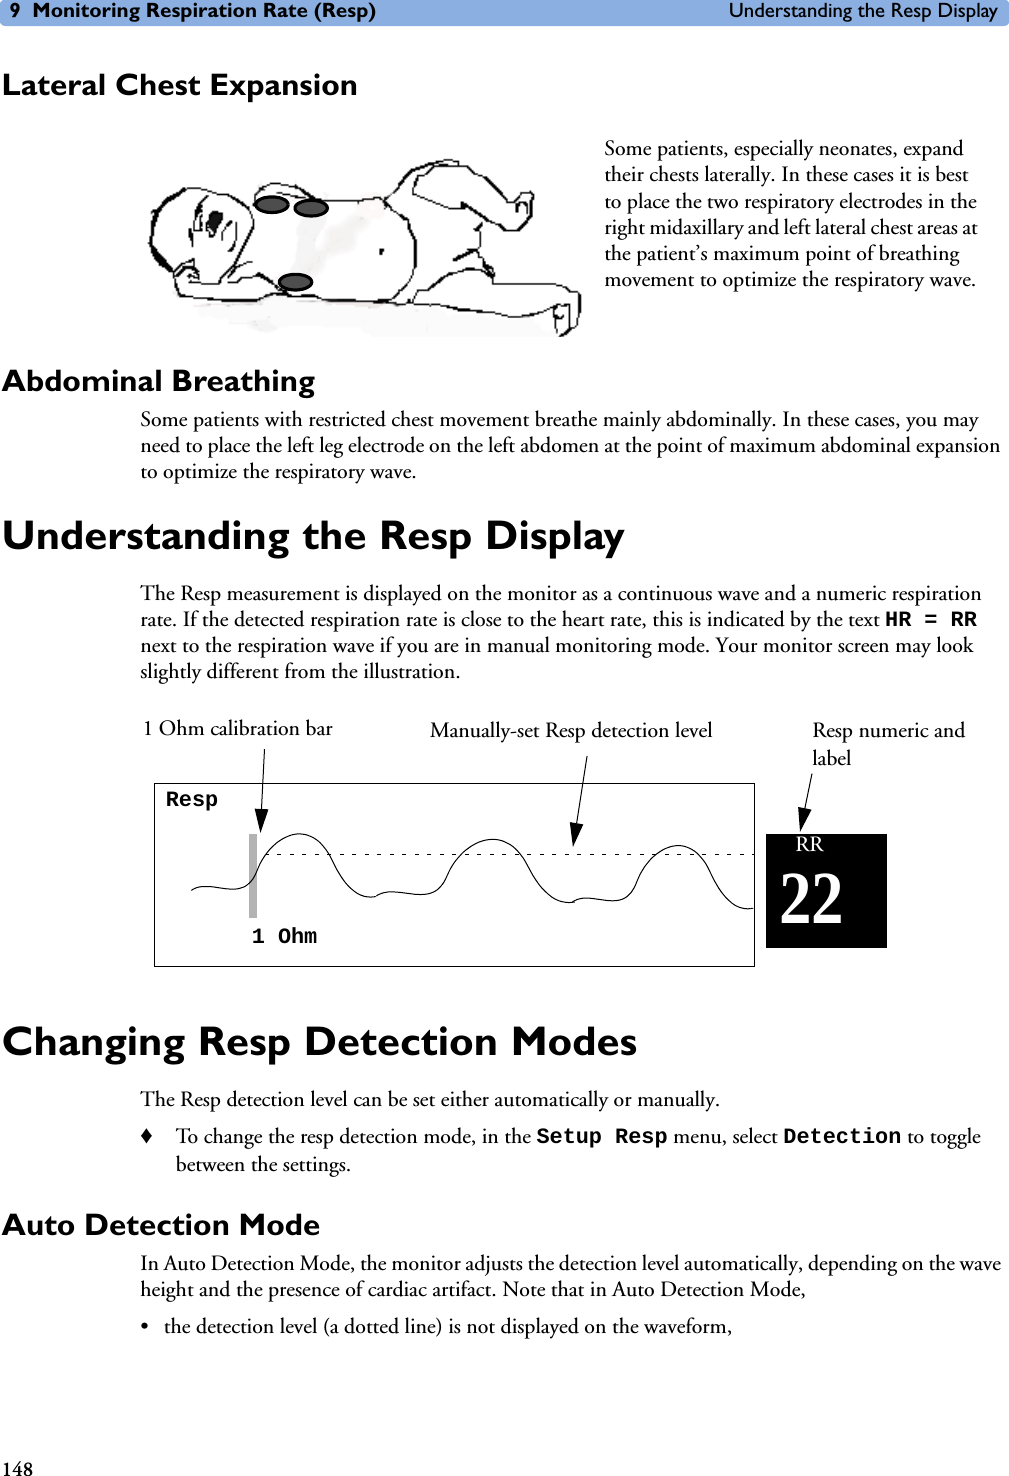 9 Monitoring Respiration Rate (Resp) Understanding the Resp Display148Lateral Chest ExpansionAbdominal BreathingSome patients with restricted chest movement breathe mainly abdominally. In these cases, you may need to place the left leg electrode on the left abdomen at the point of maximum abdominal expansion to optimize the respiratory wave.Understanding the Resp DisplayThe Resp measurement is displayed on the monitor as a continuous wave and a numeric respiration rate. If the detected respiration rate is close to the heart rate, this is indicated by the text HR = RR next to the respiration wave if you are in manual monitoring mode. Your monitor screen may look slightly different from the illustration.Changing Resp Detection ModesThe Resp detection level can be set either automatically or manually. ♦To change the resp detection mode, in the Setup Resp menu, select Detection to toggle between the settings.Auto Detection ModeIn Auto Detection Mode, the monitor adjusts the detection level automatically, depending on the wave height and the presence of cardiac artifact. Note that in Auto Detection Mode, • the detection level (a dotted line) is not displayed on the waveform,Some patients, especially neonates, expand their chests laterally. In these cases it is best to place the two respiratory electrodes in the right midaxillary and left lateral chest areas at the patient’s maximum point of breathing movement to optimize the respiratory wave. Resp1 Ohm22RRManually-set Resp detection level1 Ohm calibration bar Resp numeric and label